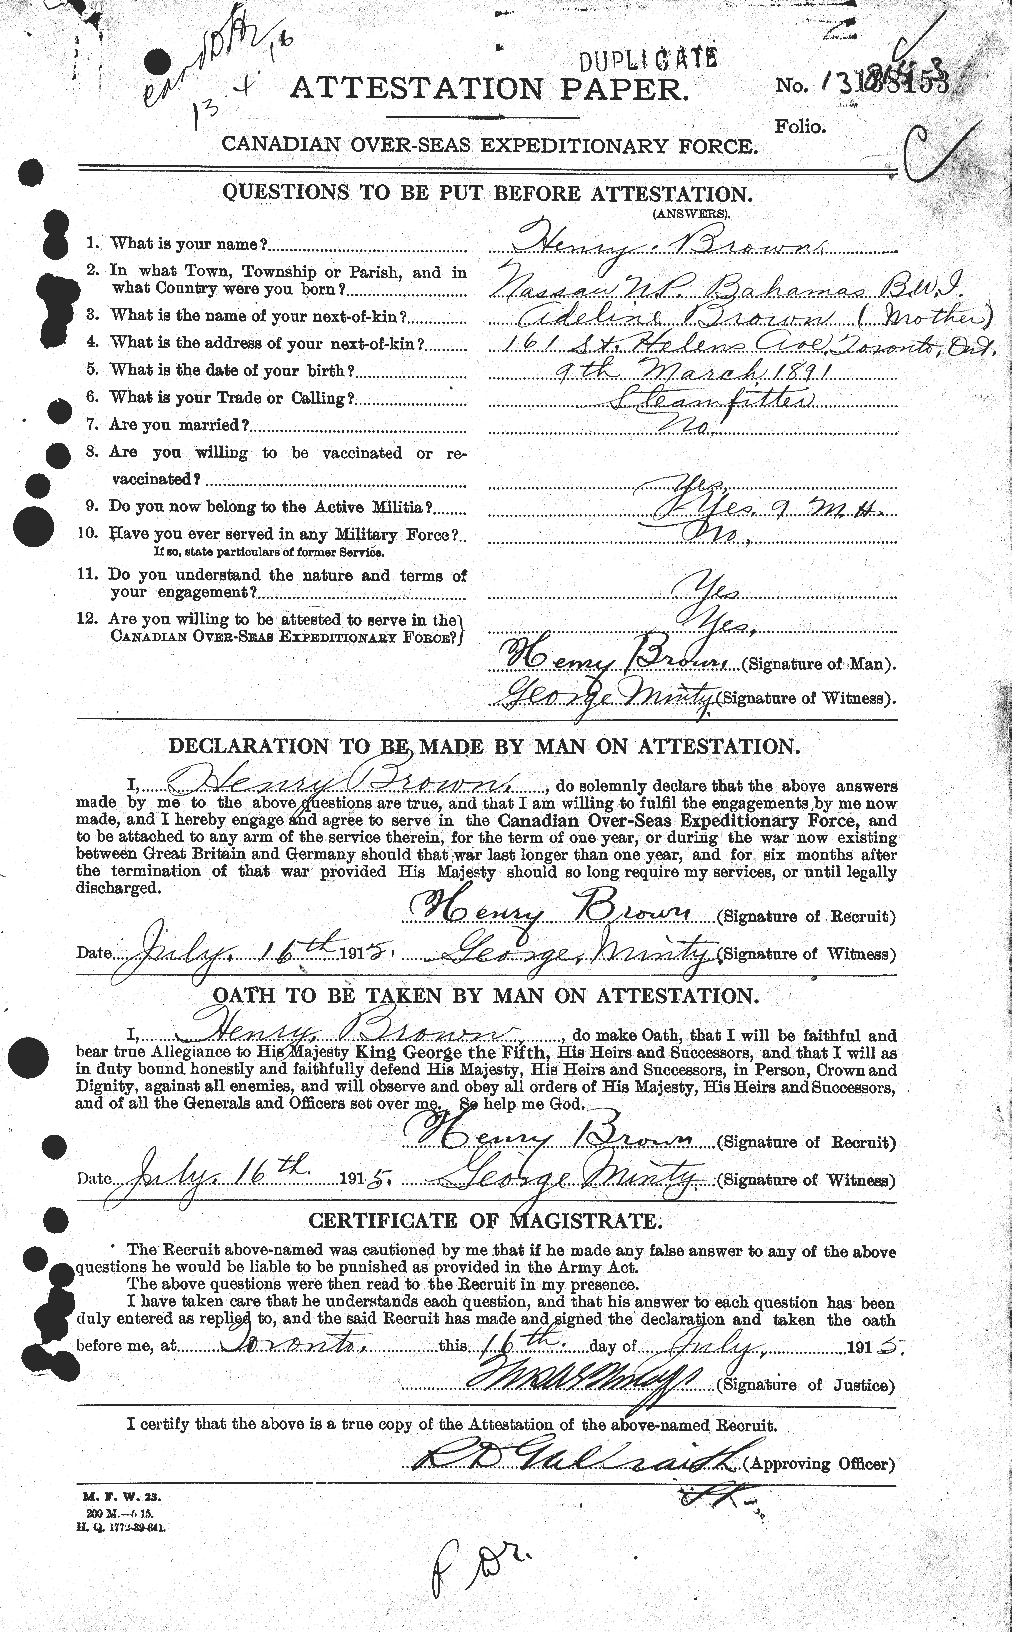 Personnel Records of the First World War - CEF 265501a